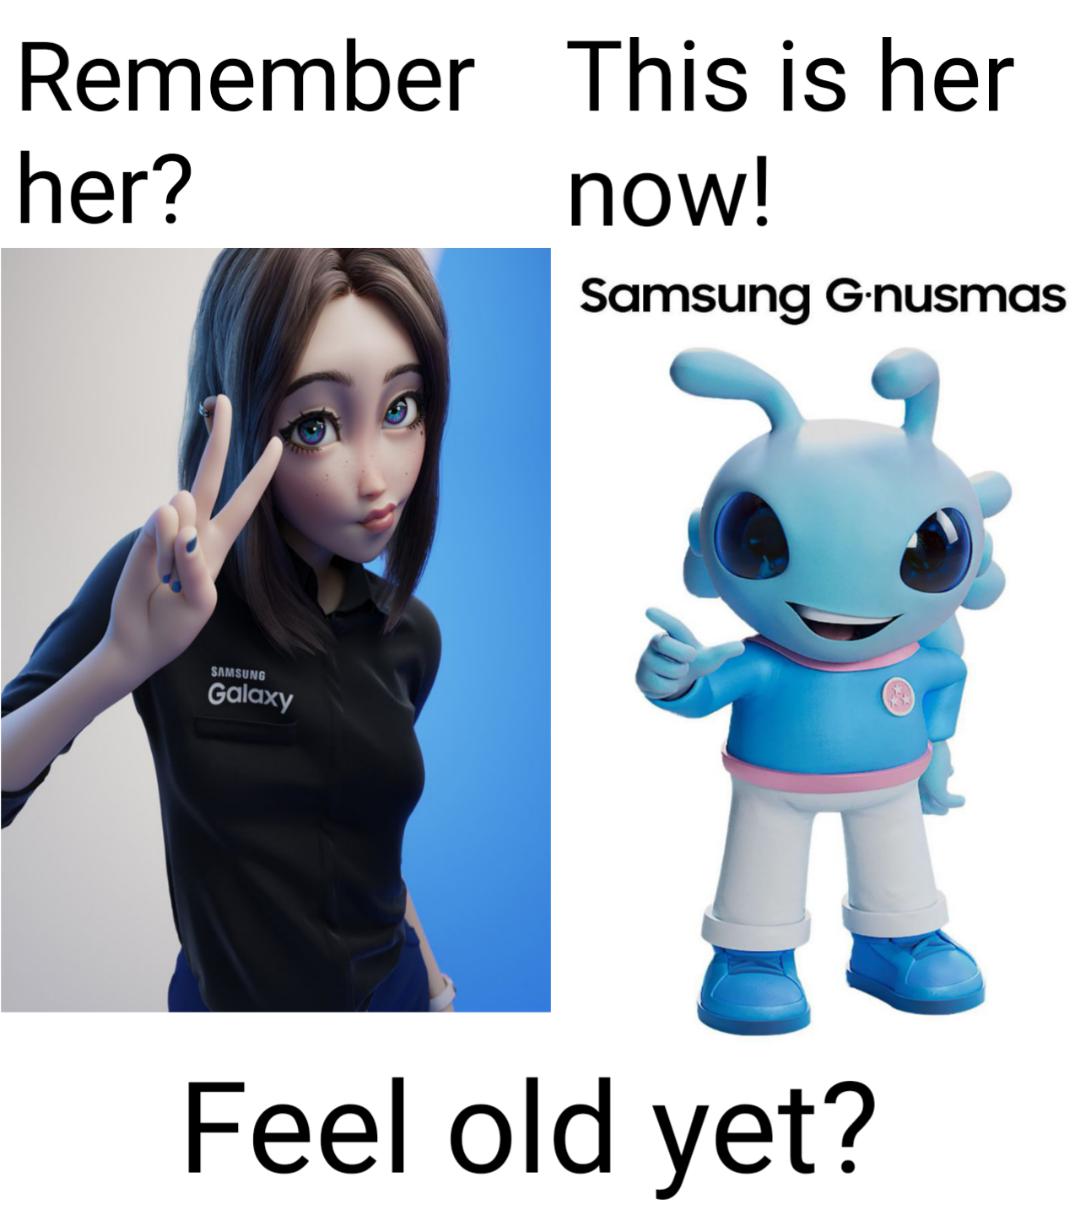 dank memes and pics - samsungs new mascot - Remember her? Sansing Galaxy This is her now! Samsung Gnusmas Feel old yet?